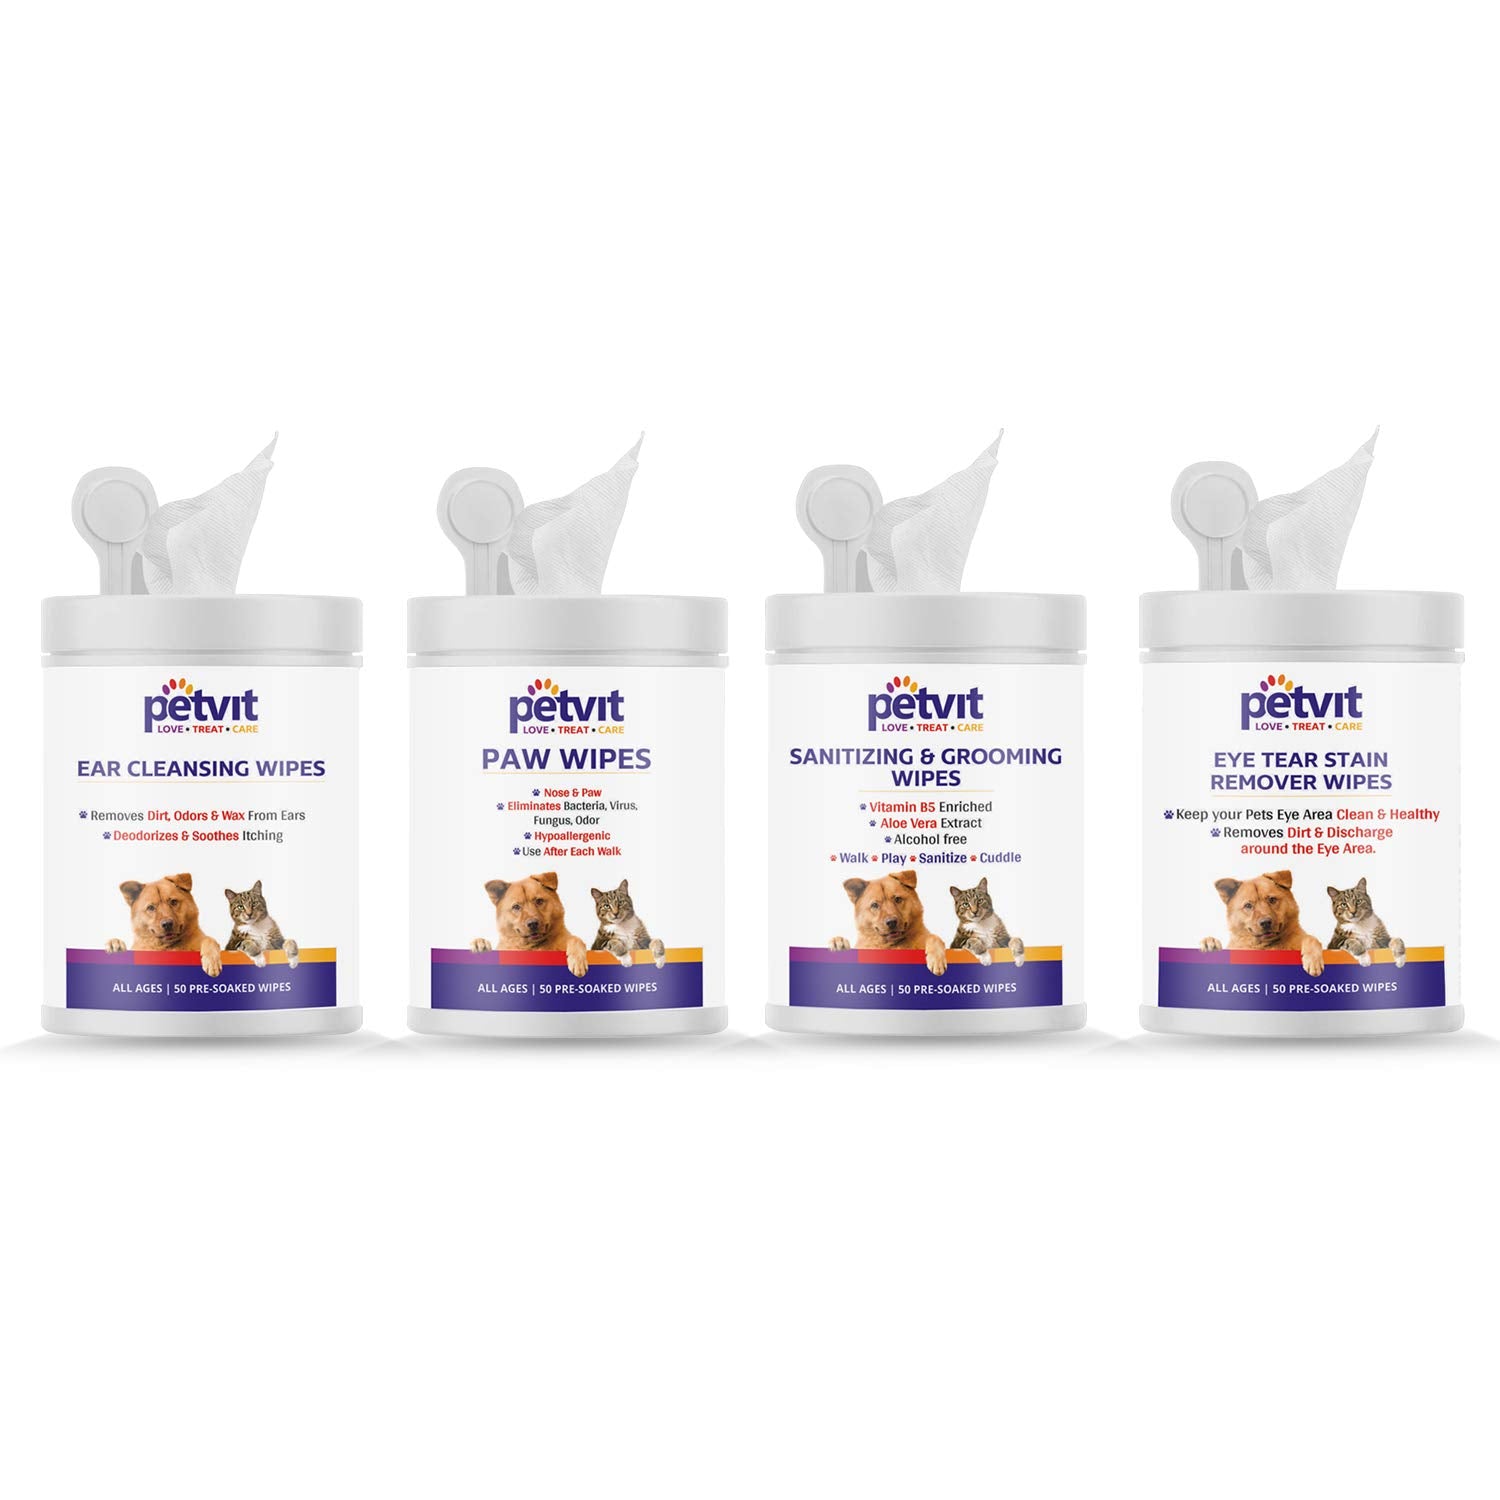 Petvit Wipes Combo (Nose and Paw Wipes + Cleansing & Grooming Wipes + Ear Cleansing Wipes + Eye Tear Stain Remover Wipes) - 50 Wipes Each